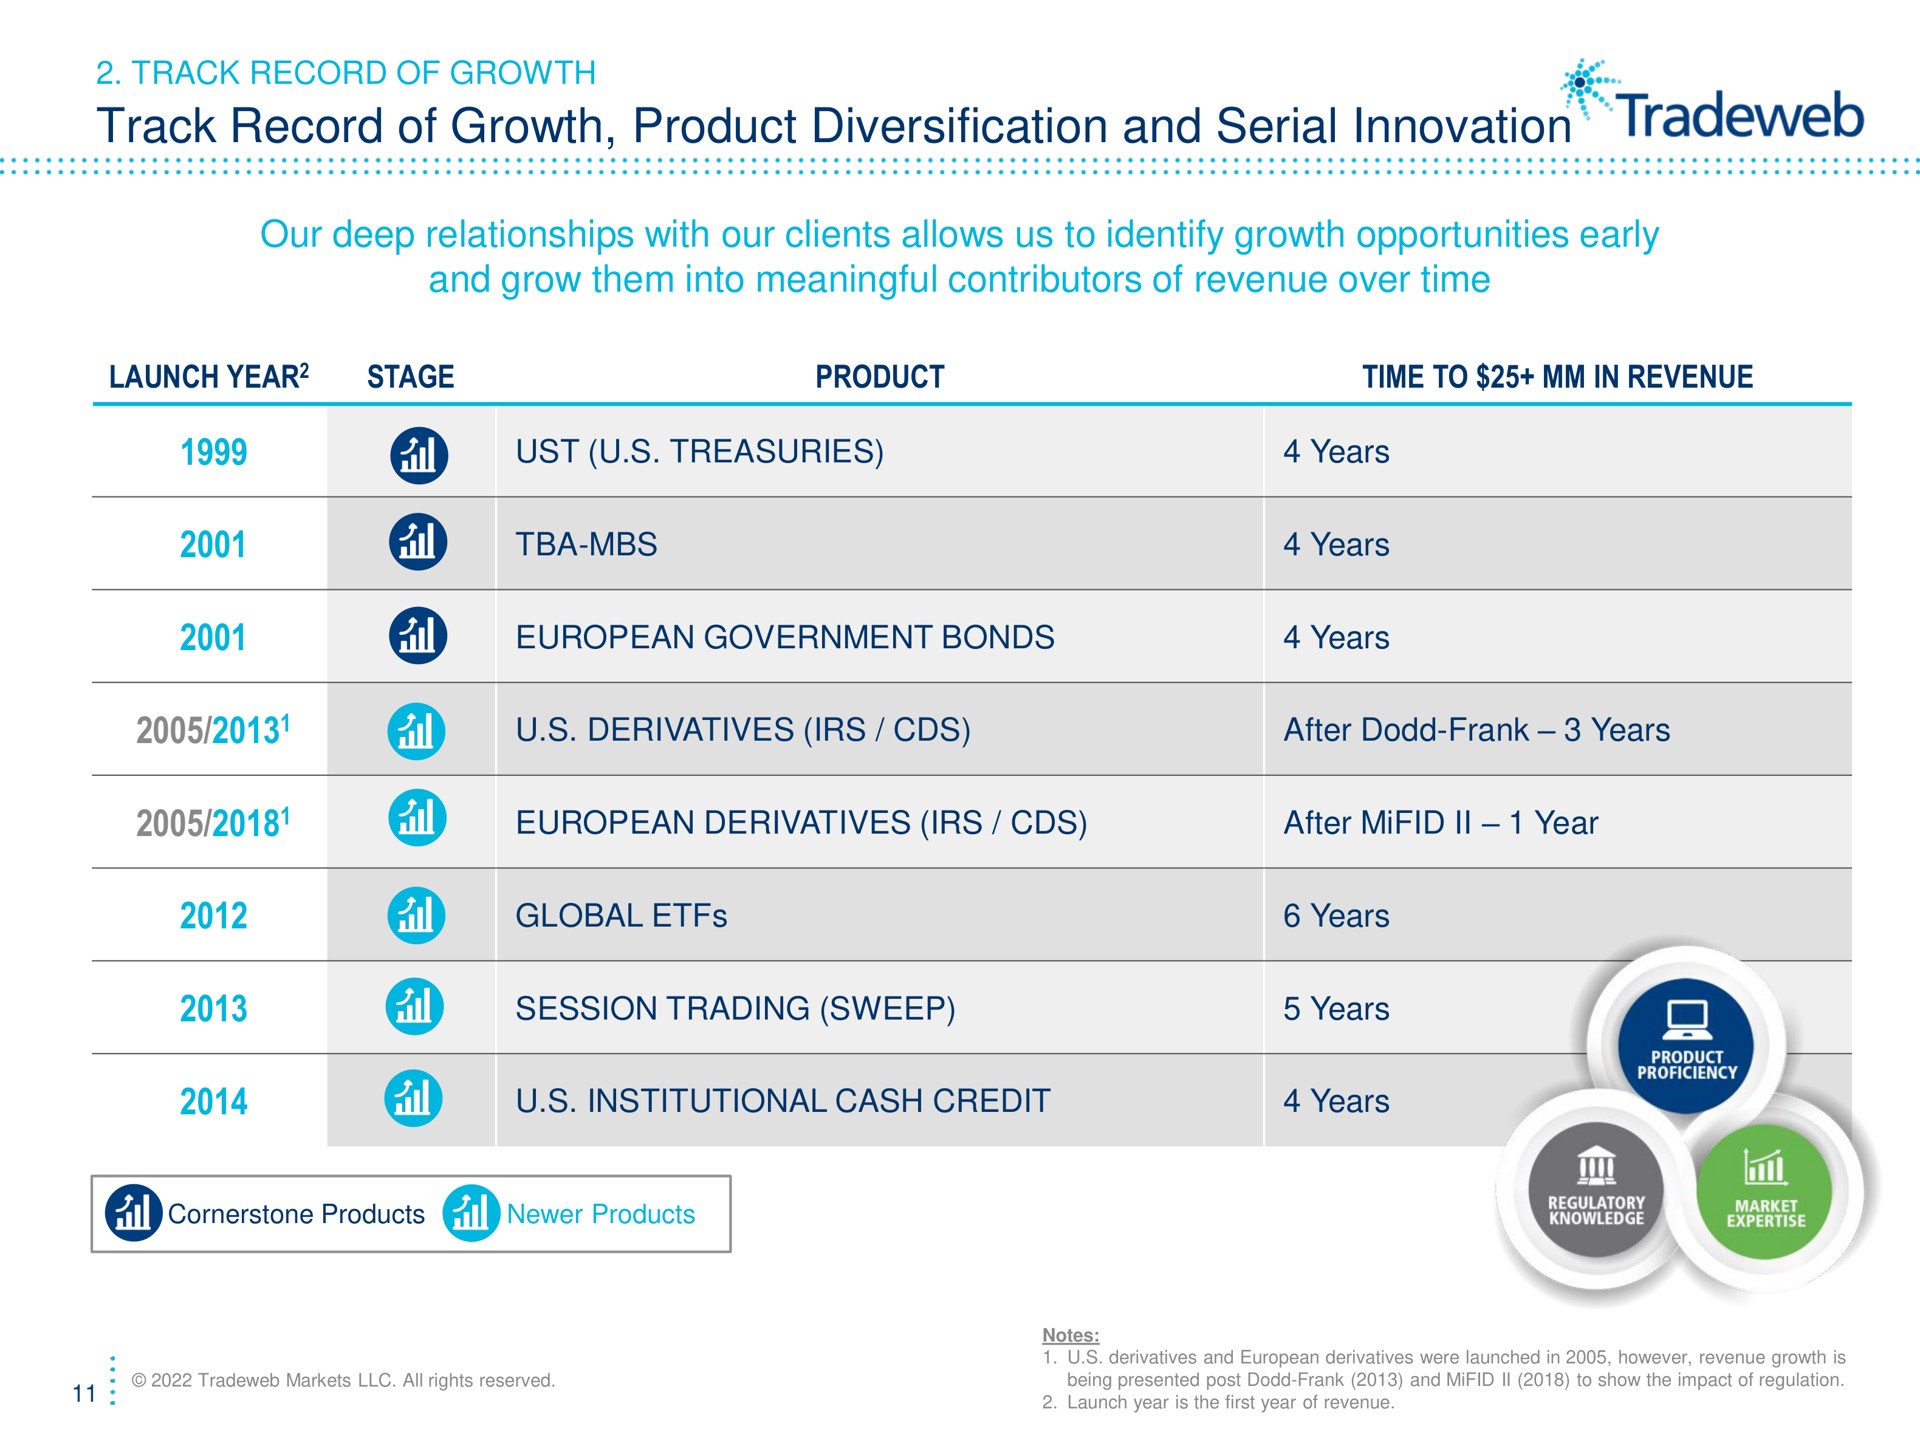 track record of growth product diversification and serial innovation our deep relationships with our clients allows us to identify growth opportunities early and grow them into meaningful contributors of revenue over time launch year stage in i i i ust treasuries government bonds years years years derivatives after dodd frank years derivatives after year global session trading sweep institutional cash credit years years years | Tradeweb